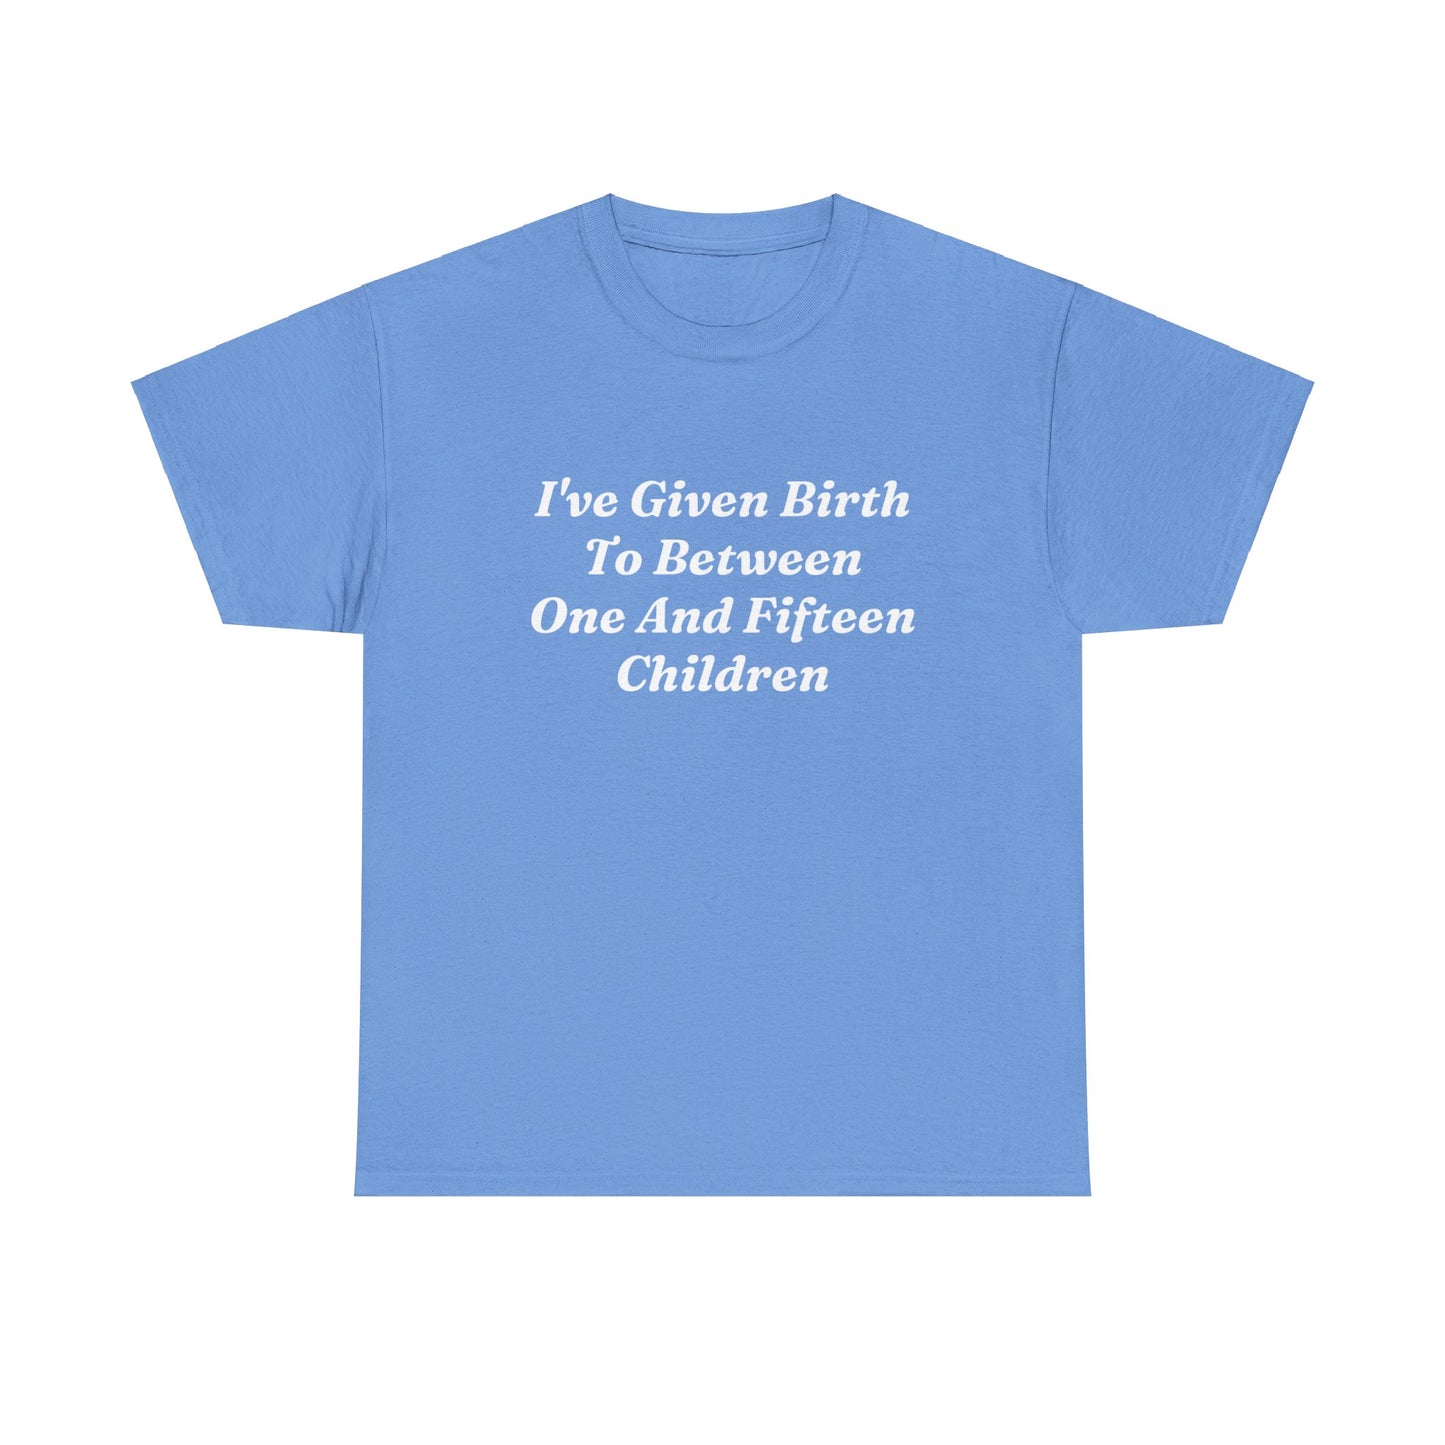 "I've Given Birth To Between One And Fifteen Children" Shirt